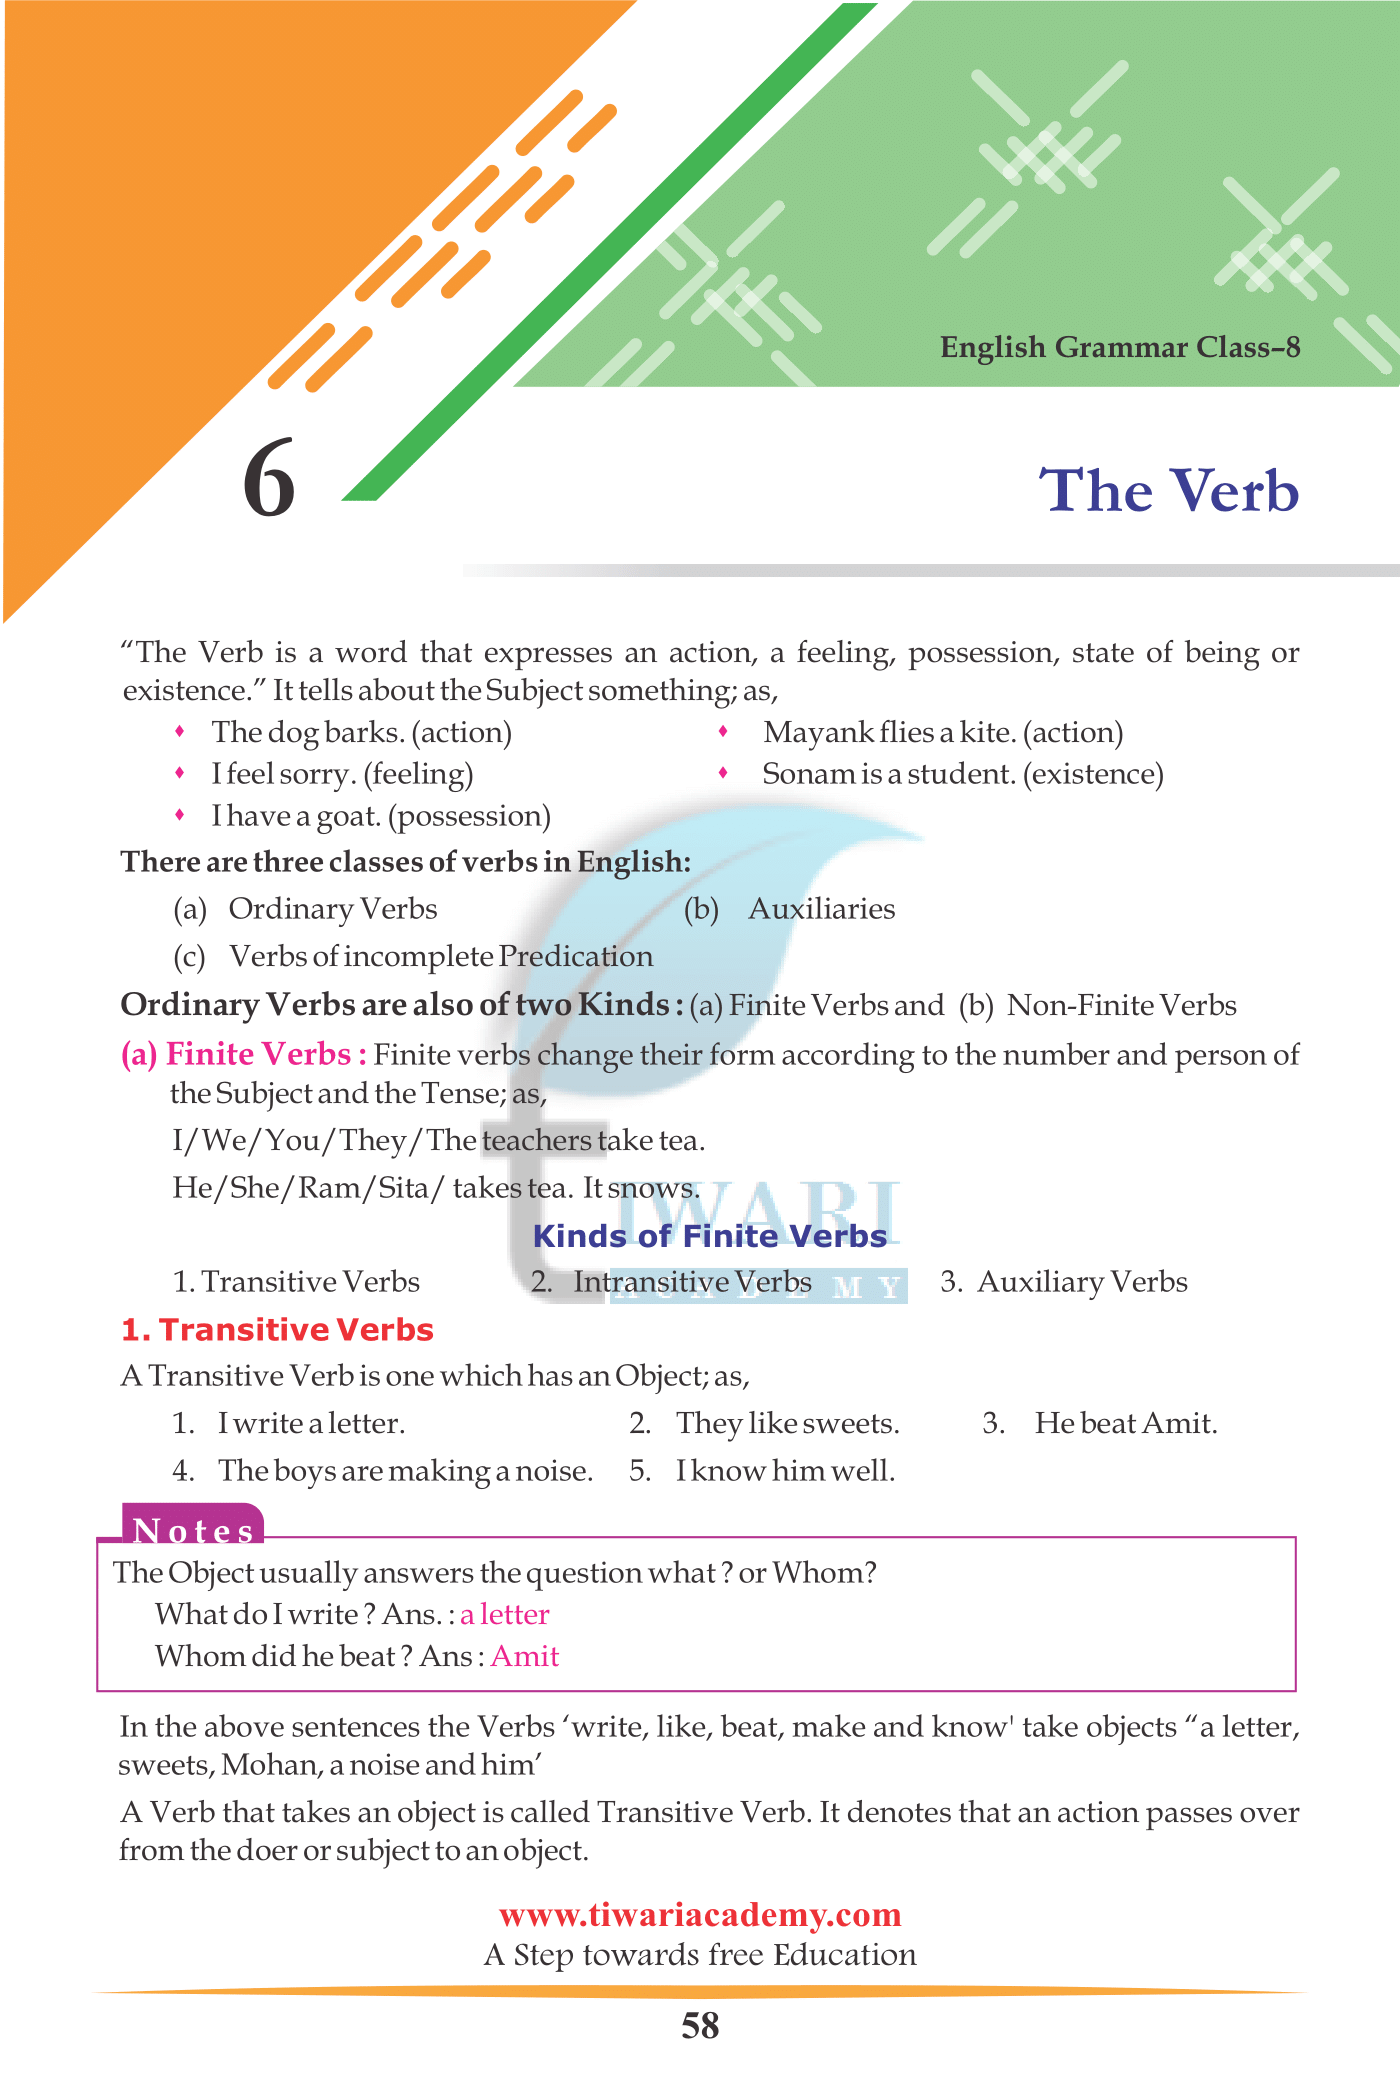 Class 8 English Grammar Chapter 6 The Verb for 2022-2023